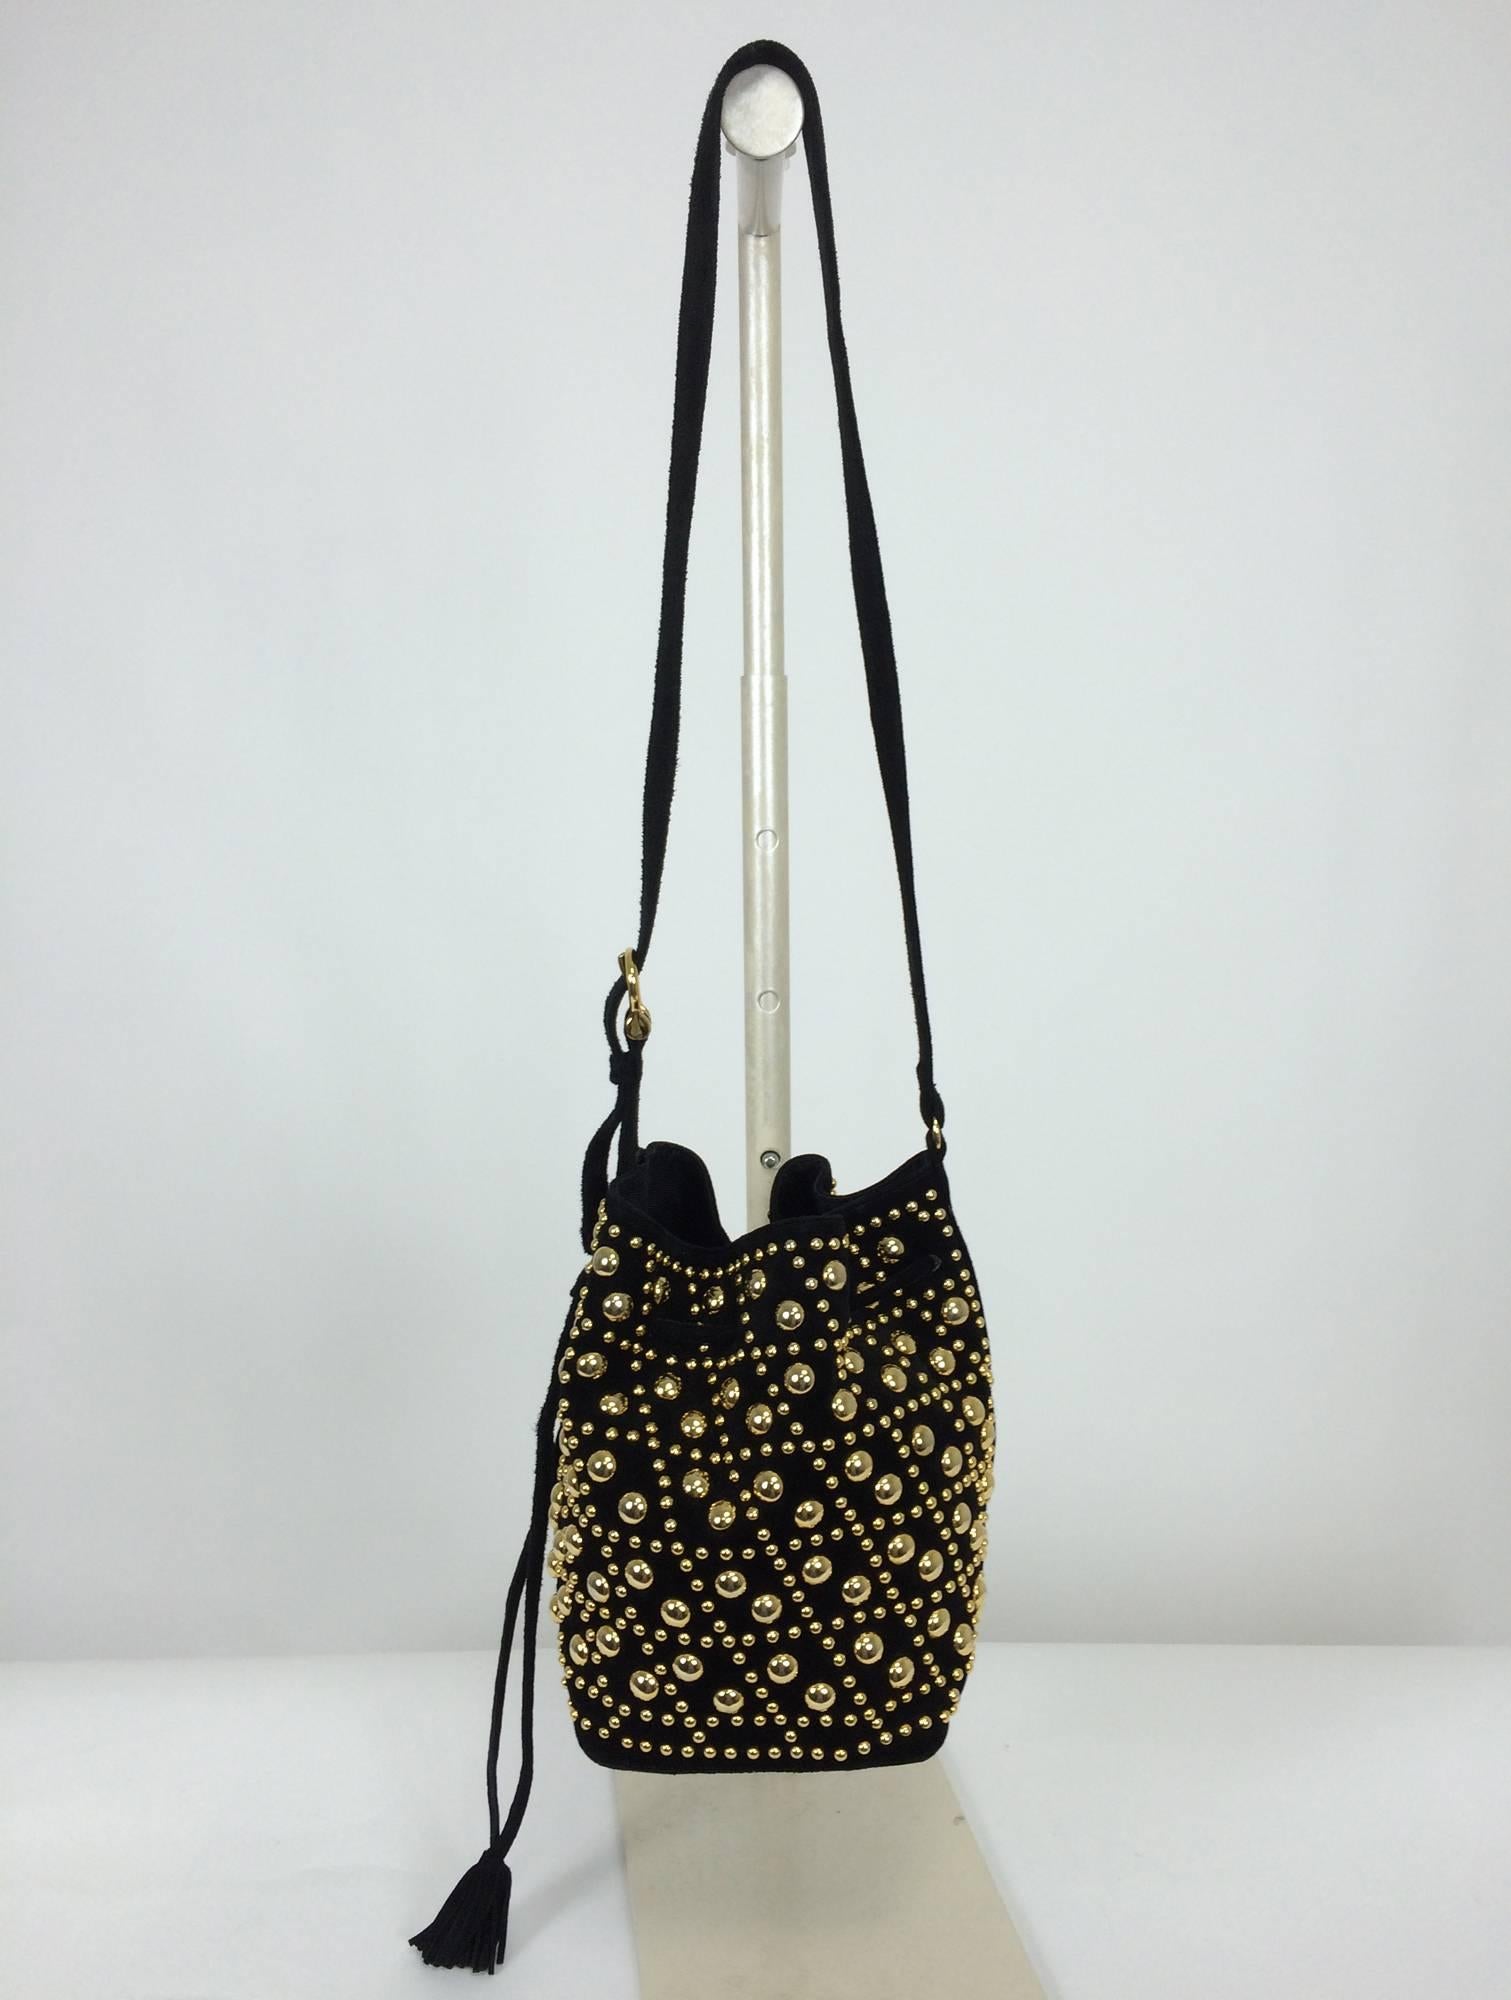 Gold studded black suede shoulder bag Sepcoeur Paris 1980s...Soft black suede shoulder bag is heavily studded with large and small gold studs...The long shoulder strap has a gold buckle and can be adjusted...There are 4 gold feet at the bottom...The